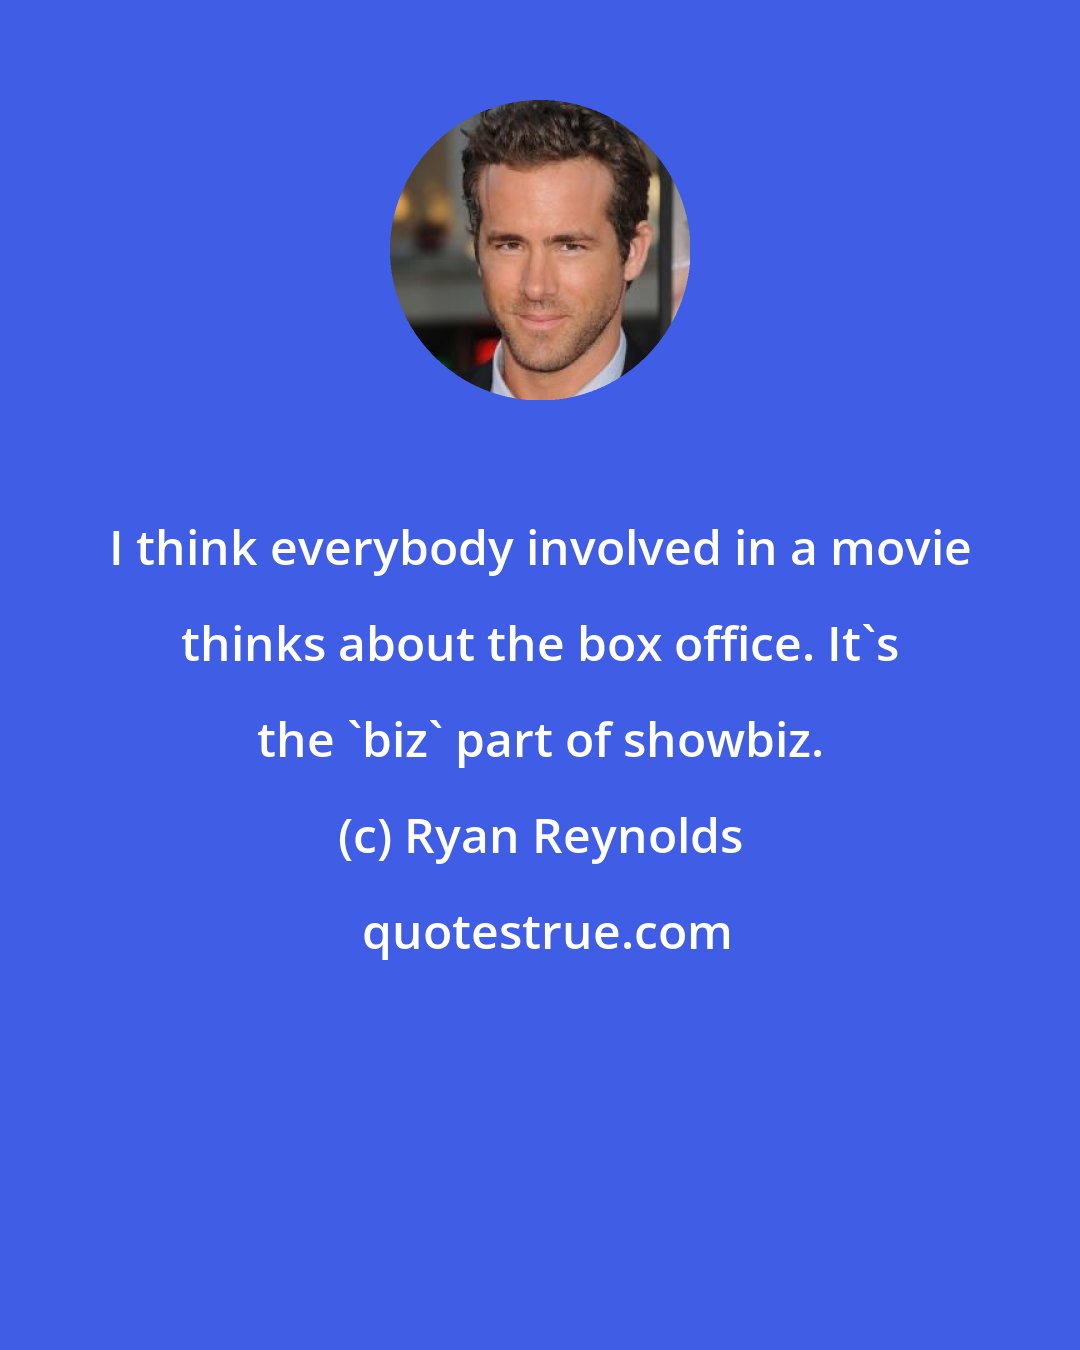 Ryan Reynolds: I think everybody involved in a movie thinks about the box office. It's the 'biz' part of showbiz.